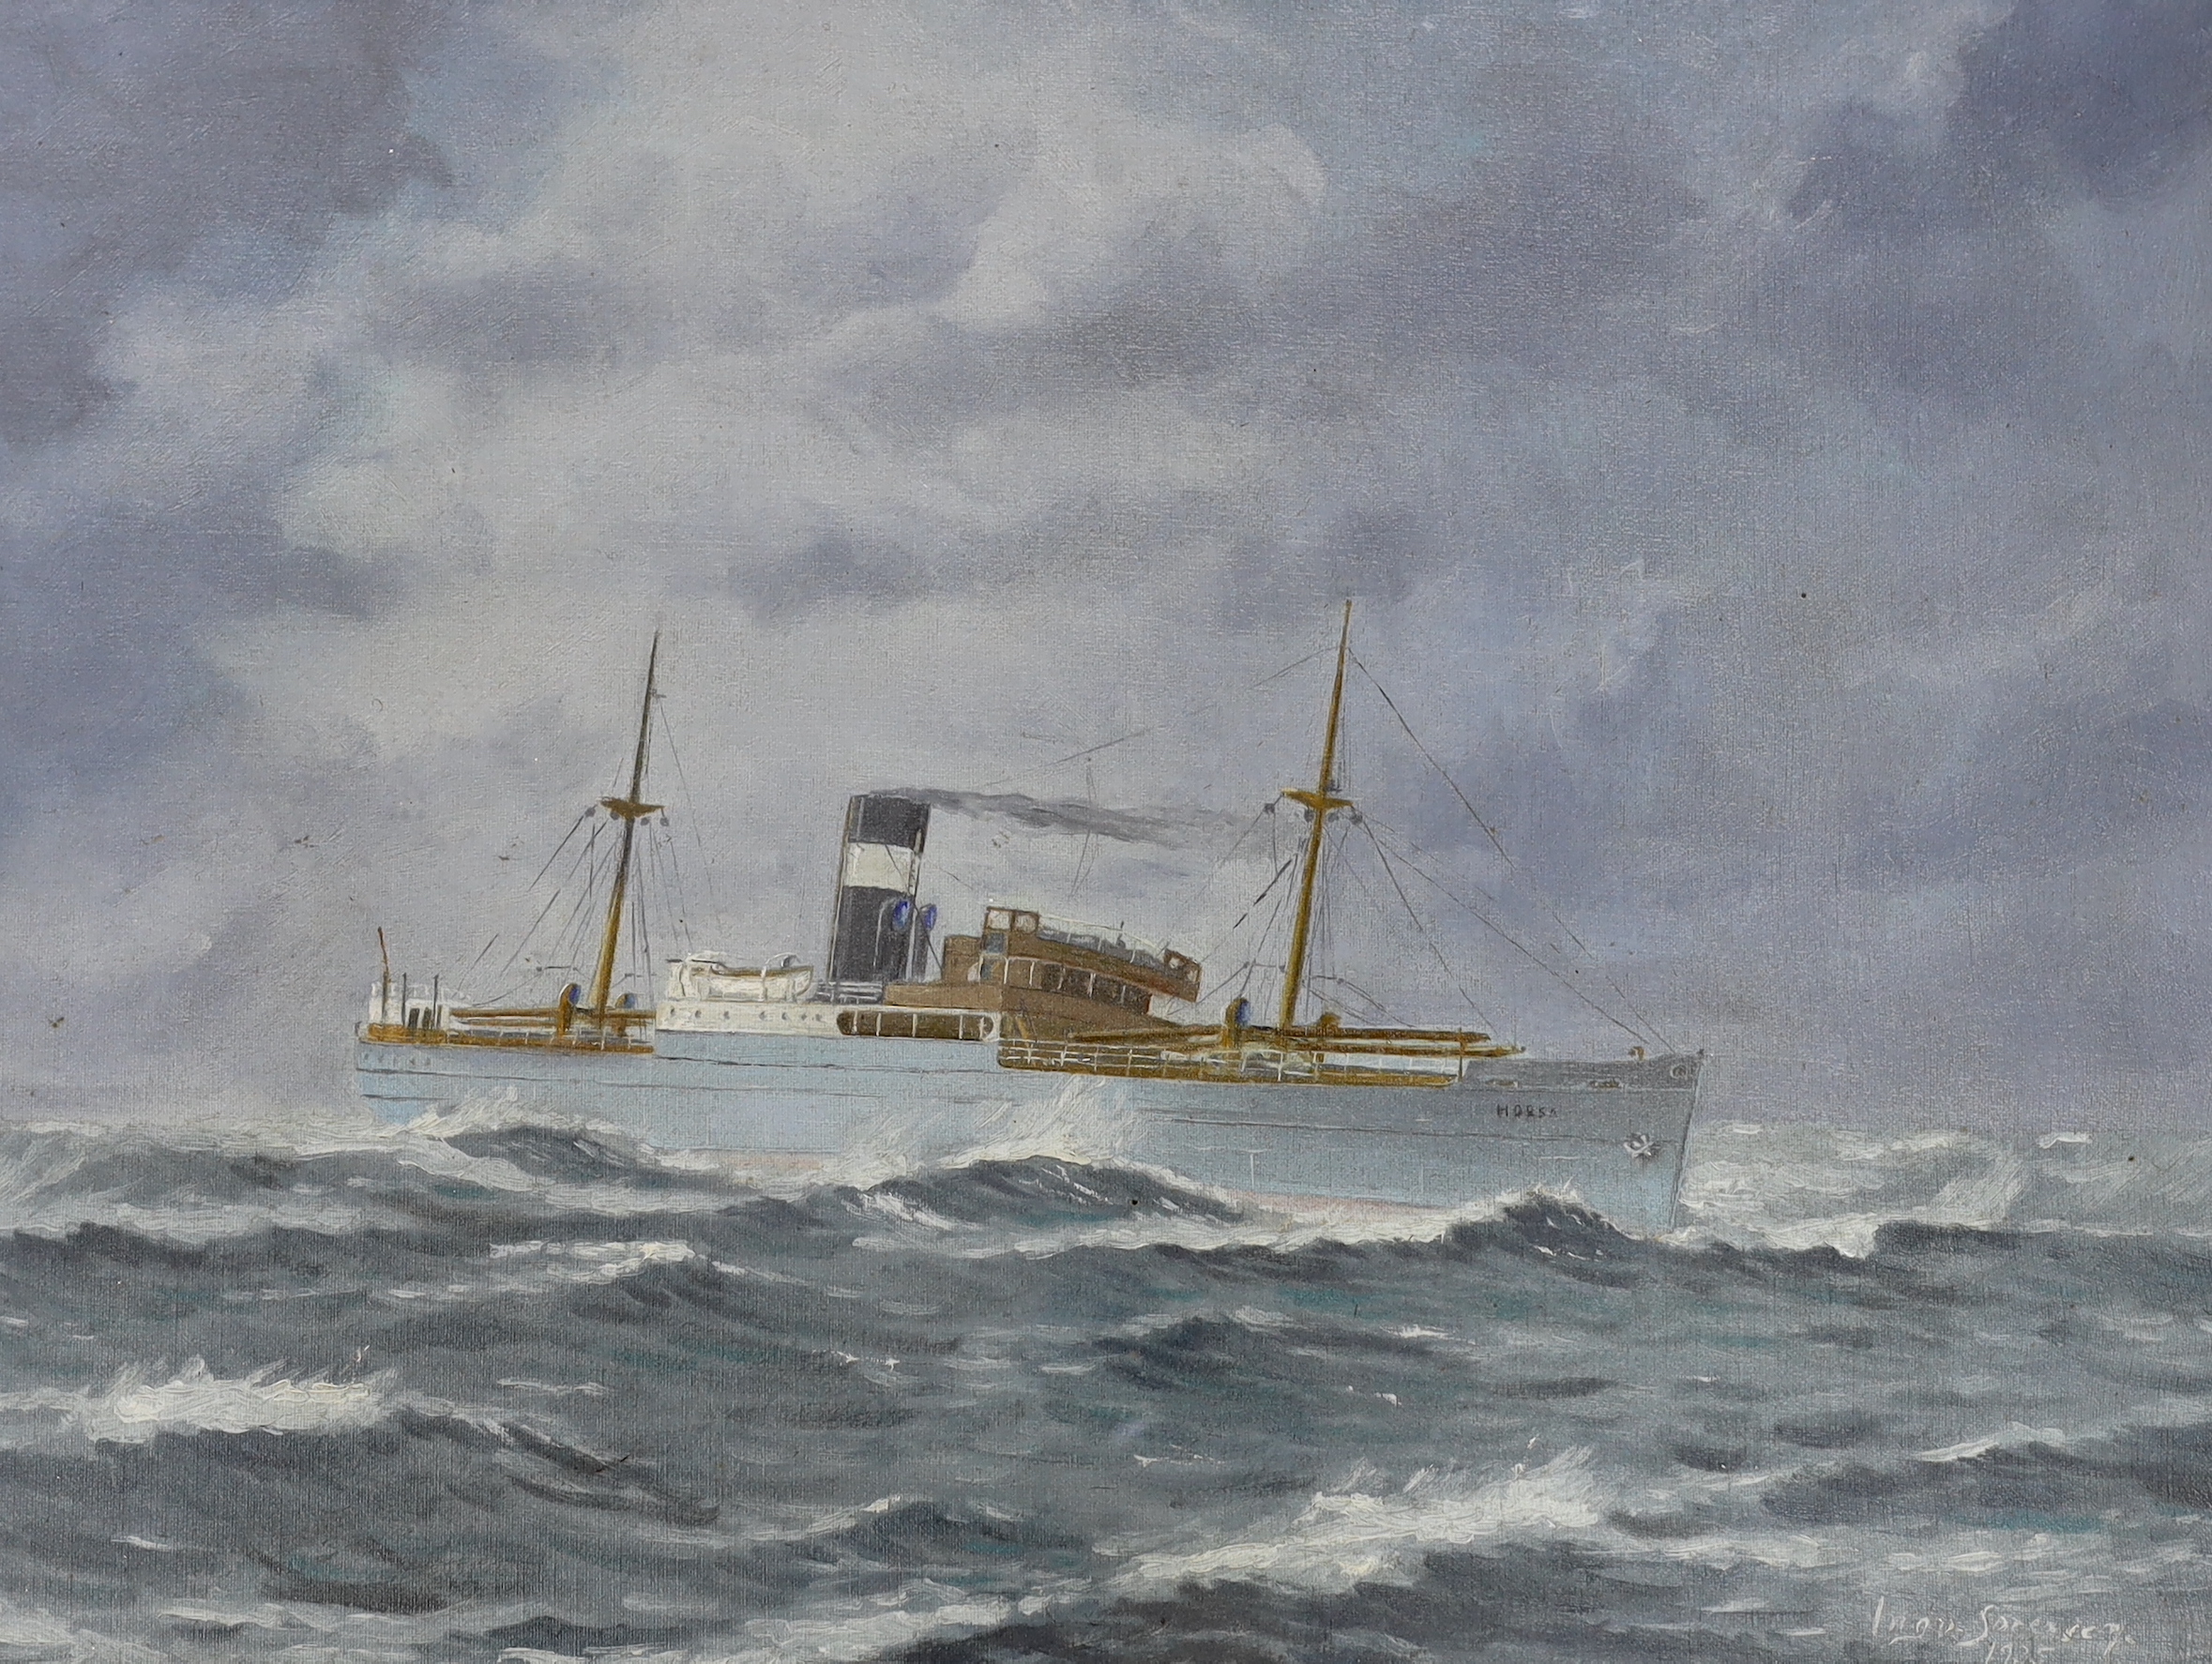 Ingu Sorensen, oil on canvas board, Steam yacht 'Horsa' at sea, signed and dated 1935, 51 x 68cm